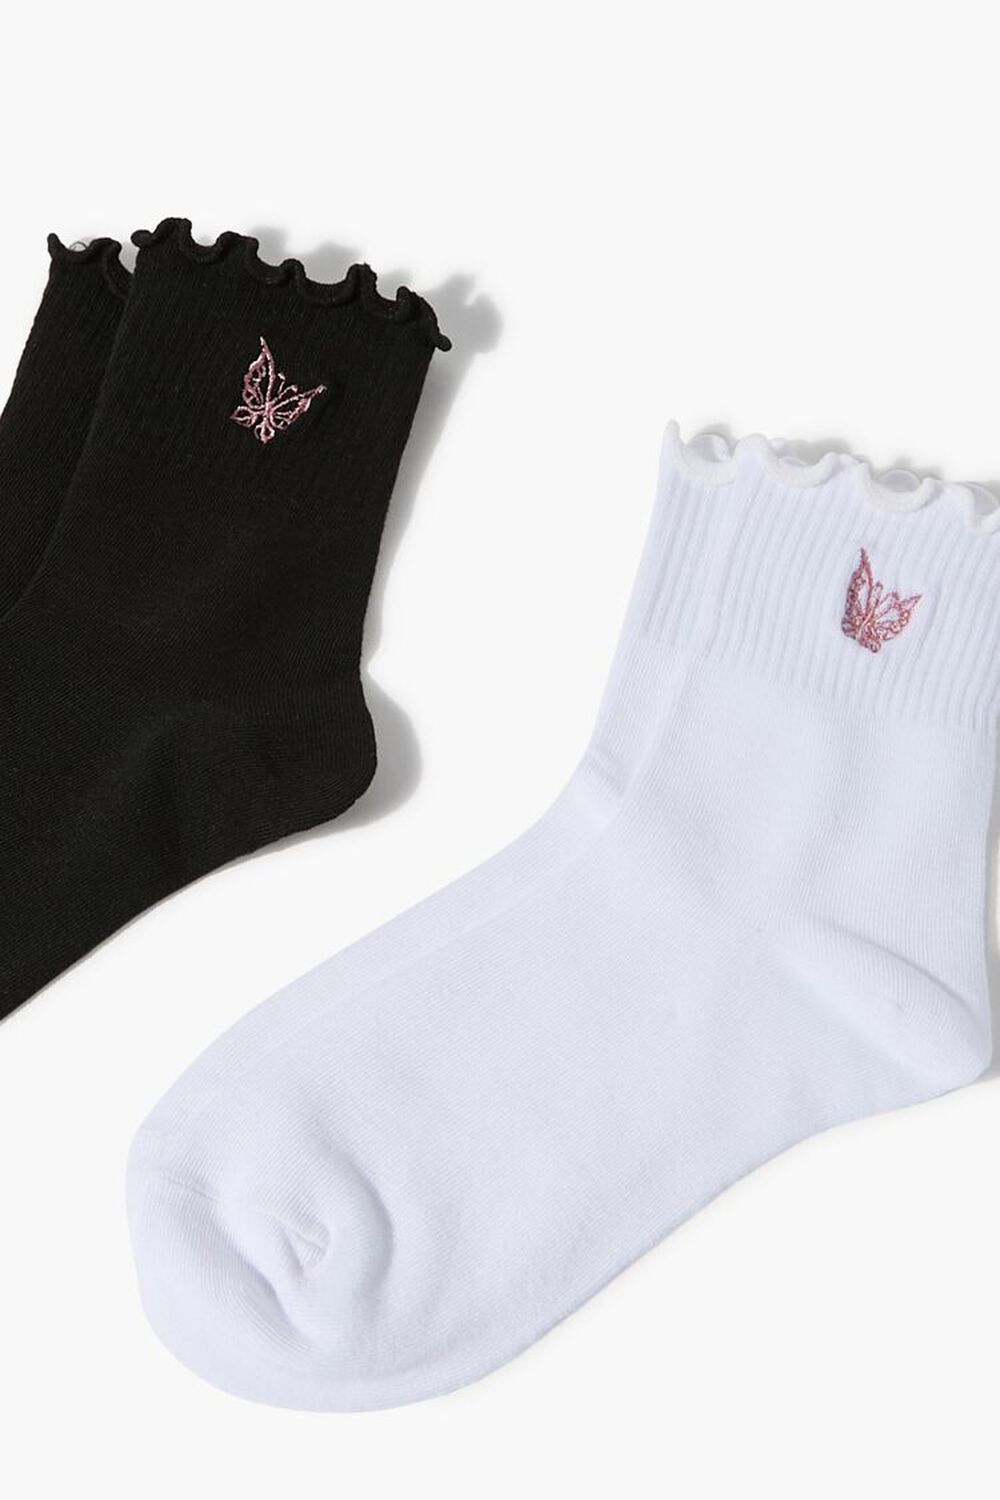 Butterfly Crew Sock Set - 2 pack, image 3